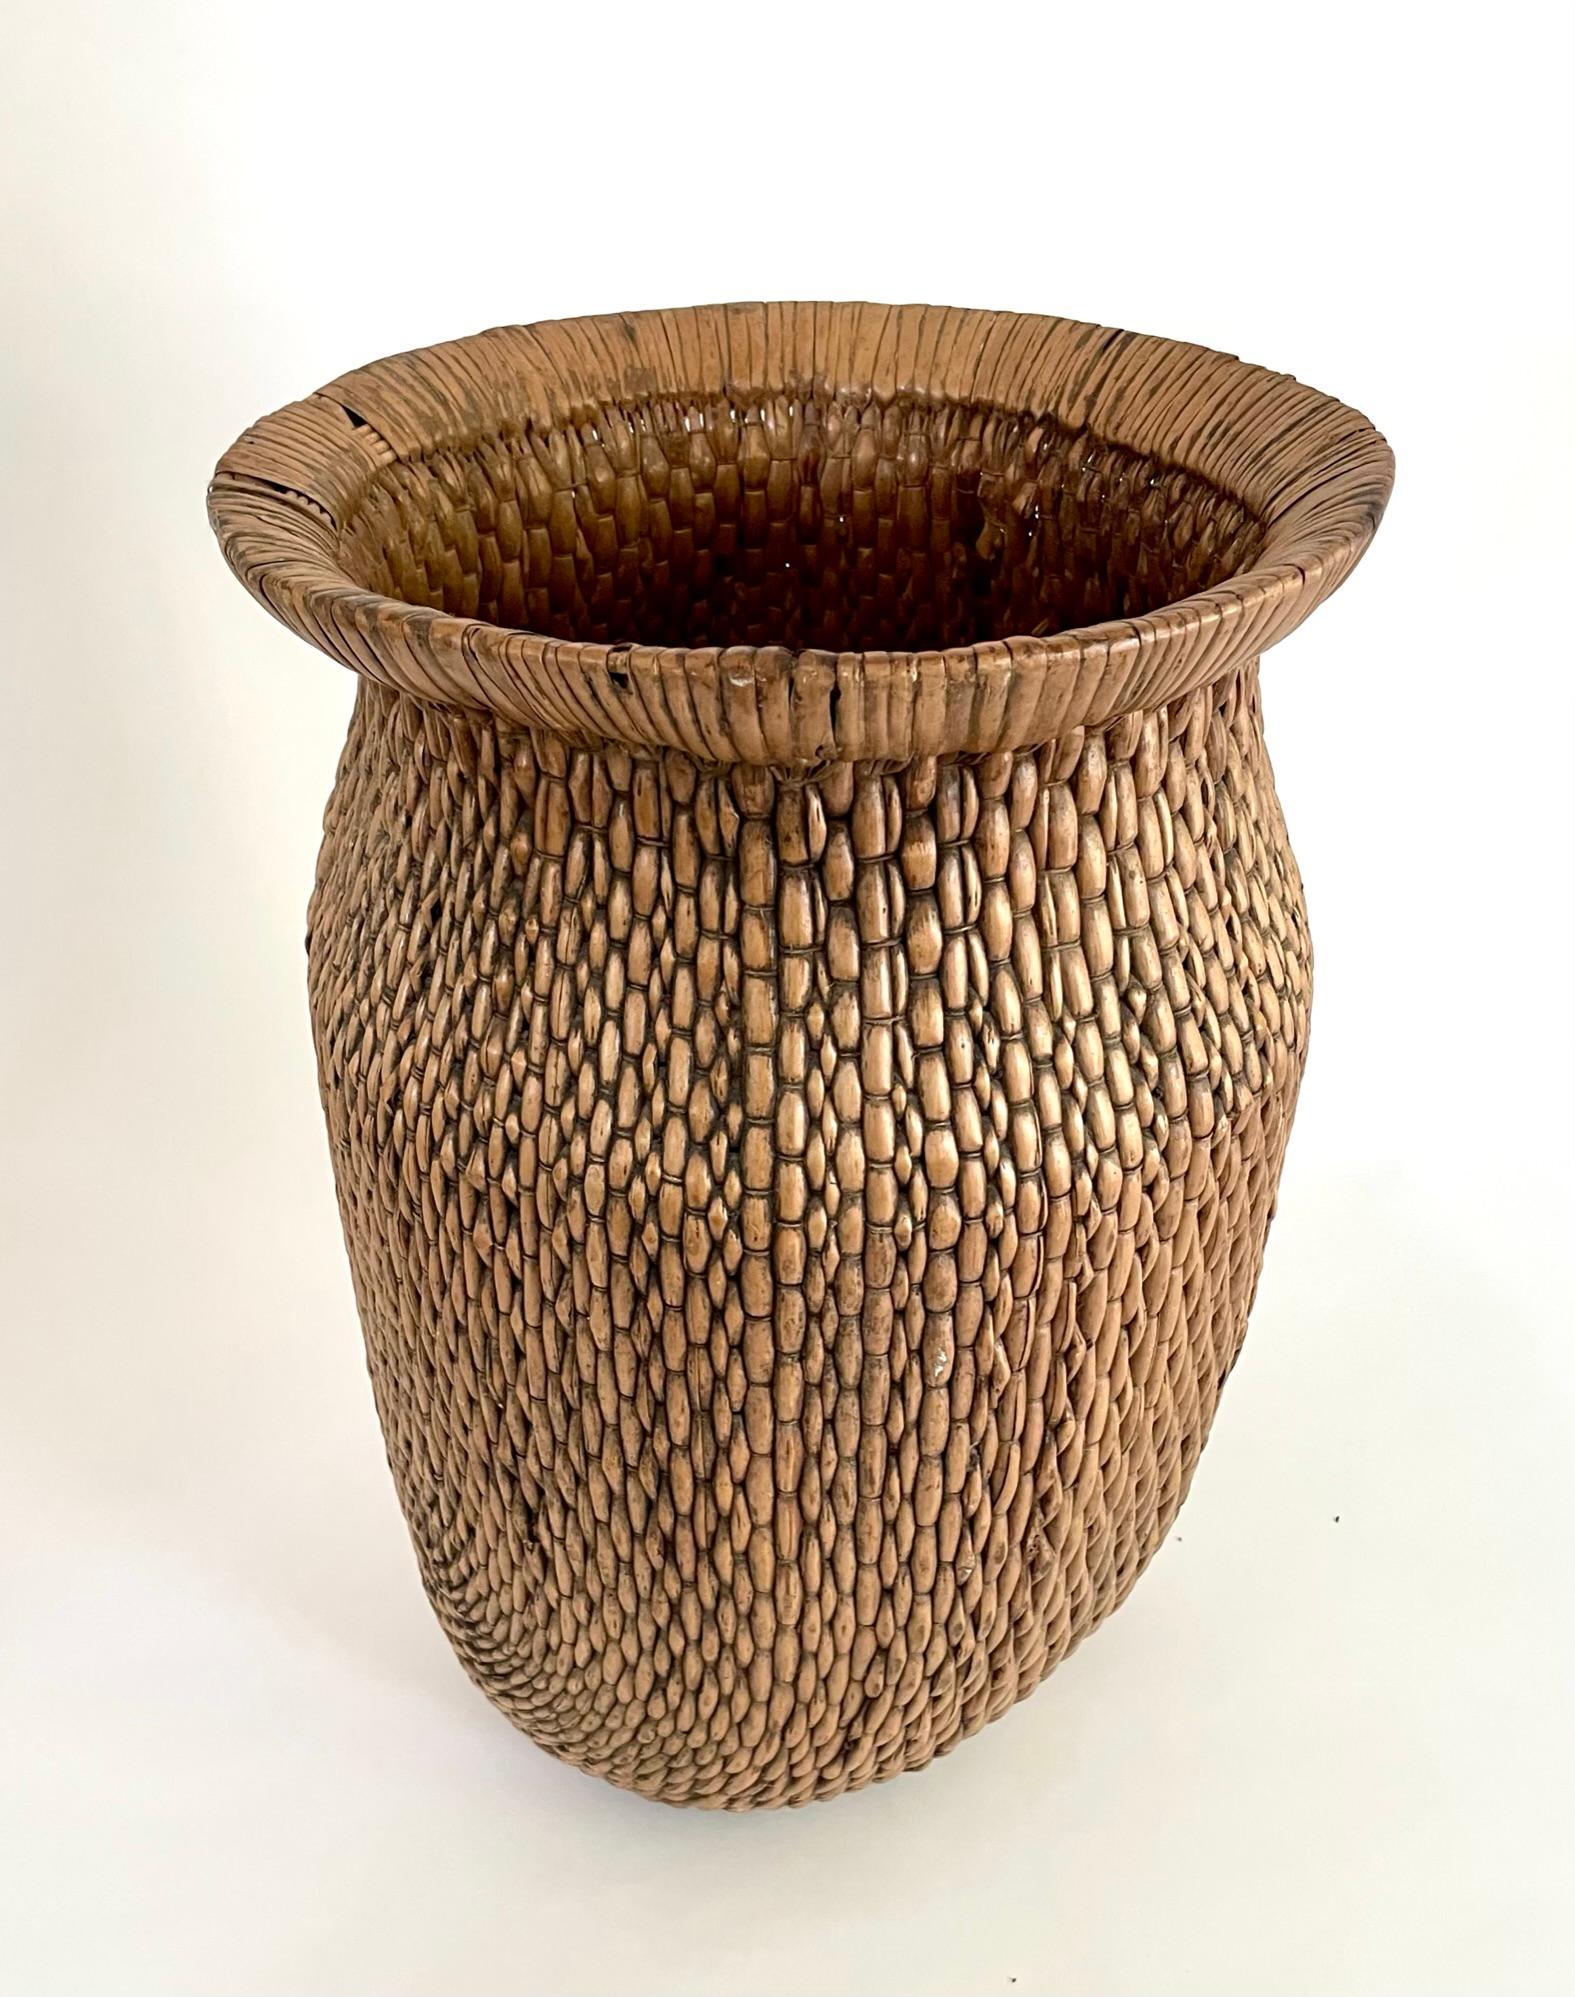 Early 20th century woven Chinese willow baskets. These beautifully shaped hand woven basket were originally used in the kitchen and gardens.